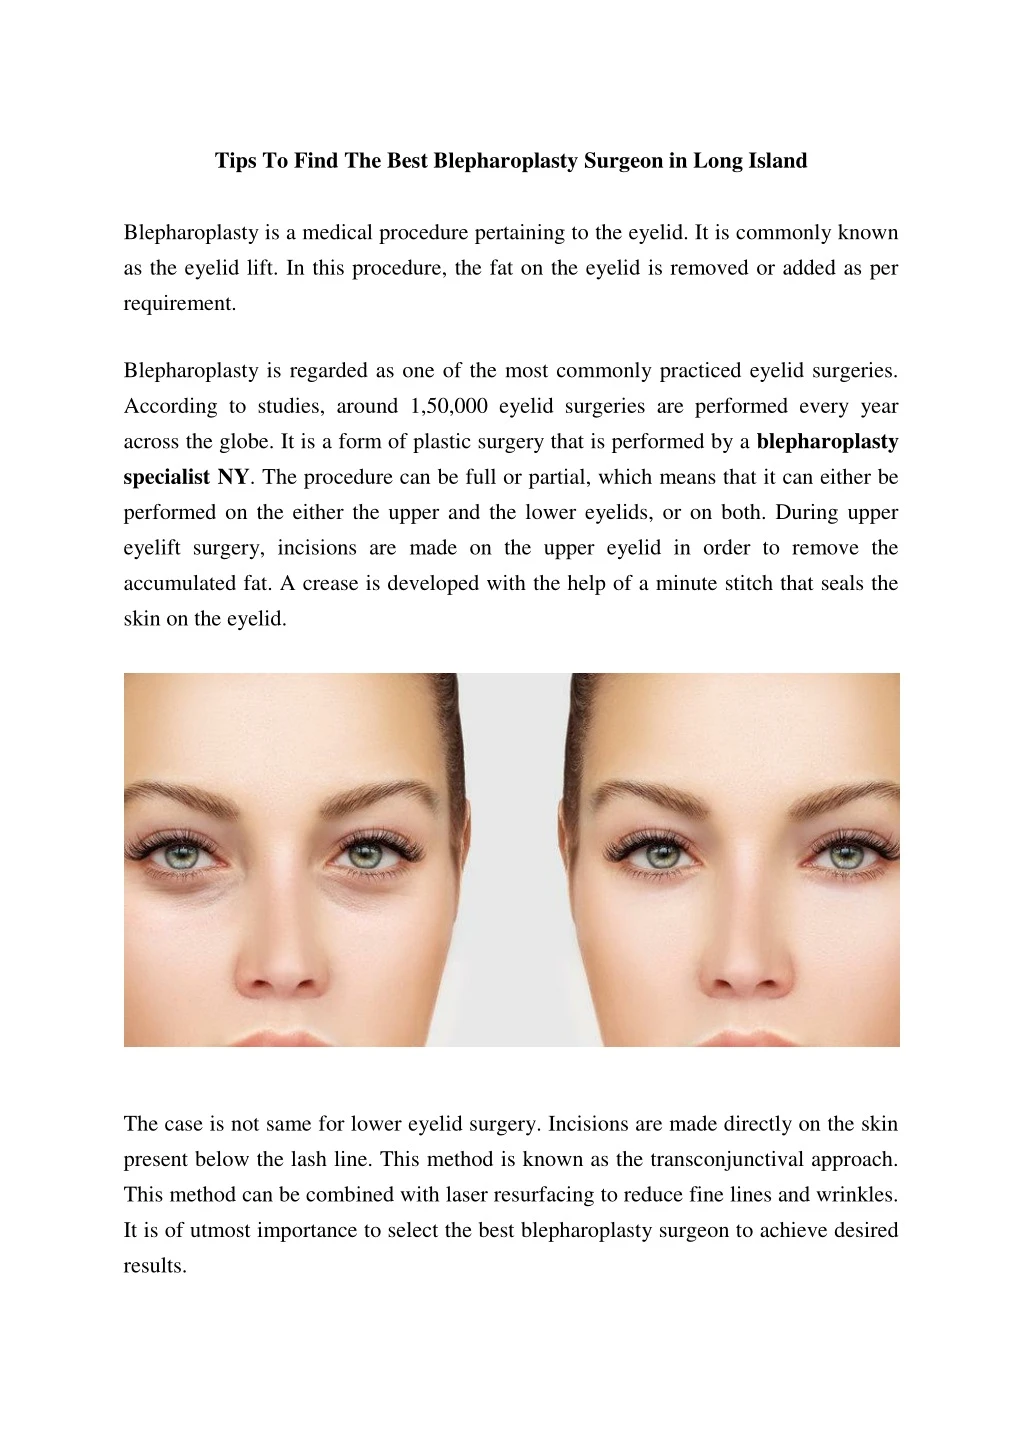 tips to find the best blepharoplasty surgeon